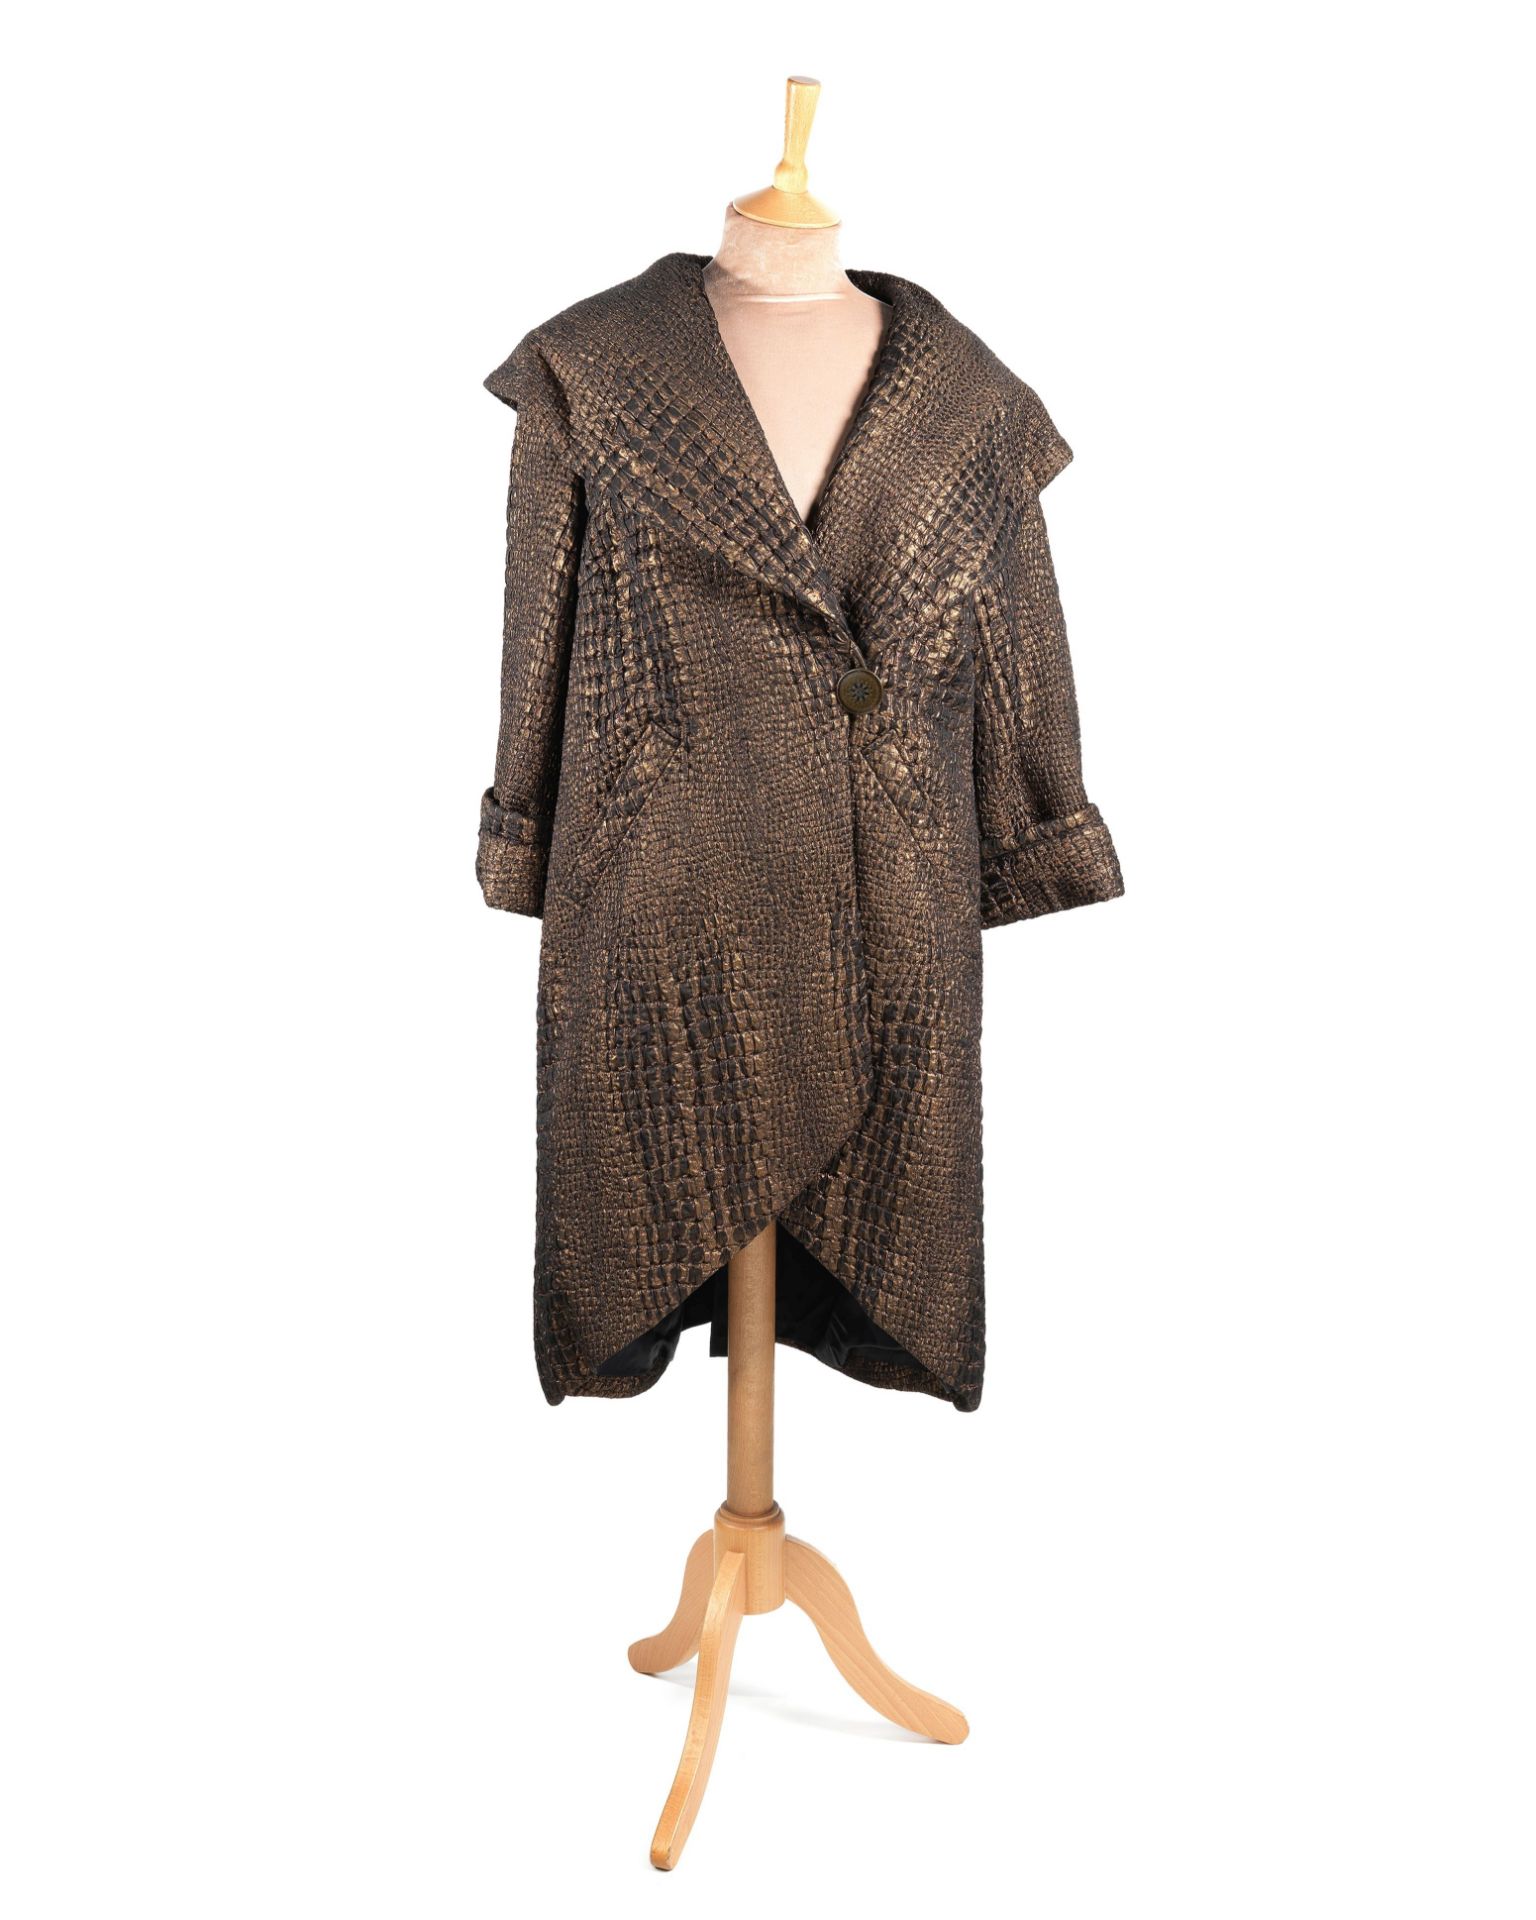 The Children Act: A screen-used bronze brocade evening coat worn by Emma Thompson for her role as...